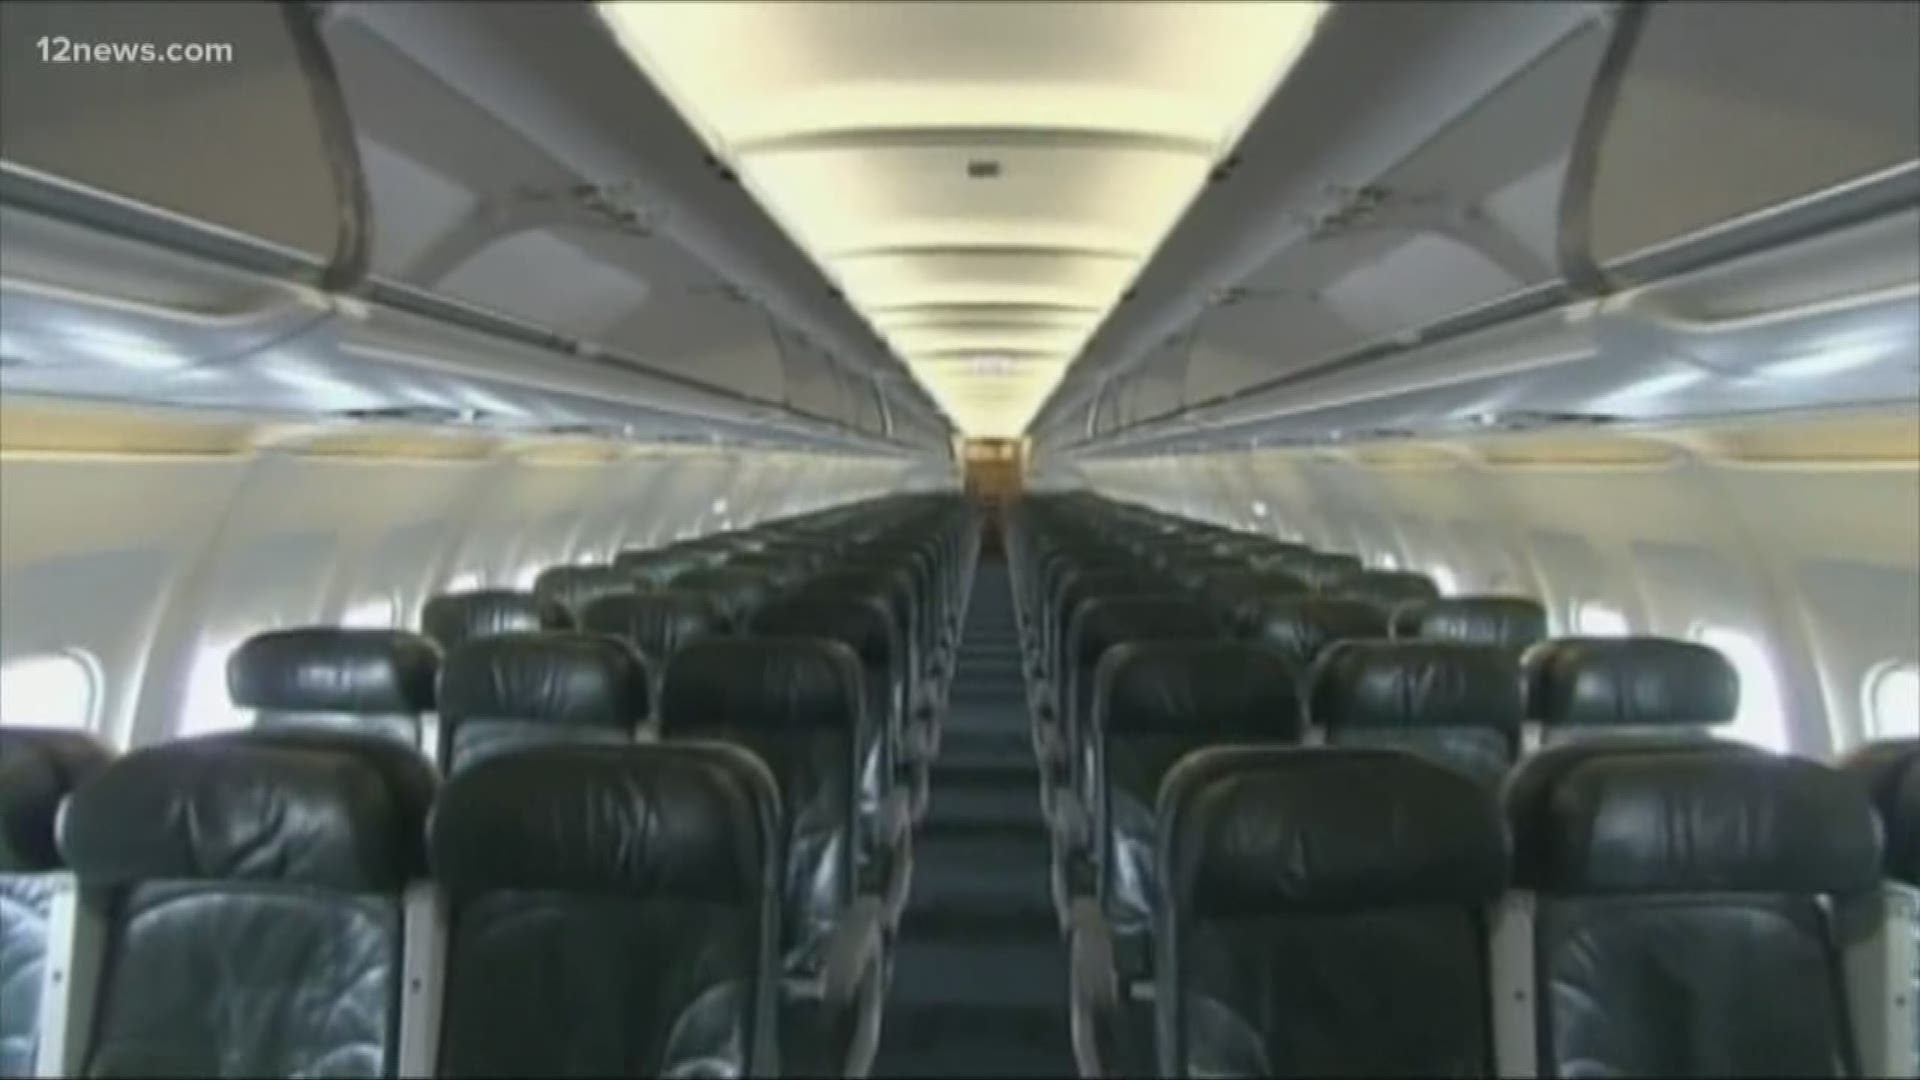 Shrinking seats on planes prompted a flyer's rights passenger group to ask the FAA to regulate seat size and distance.